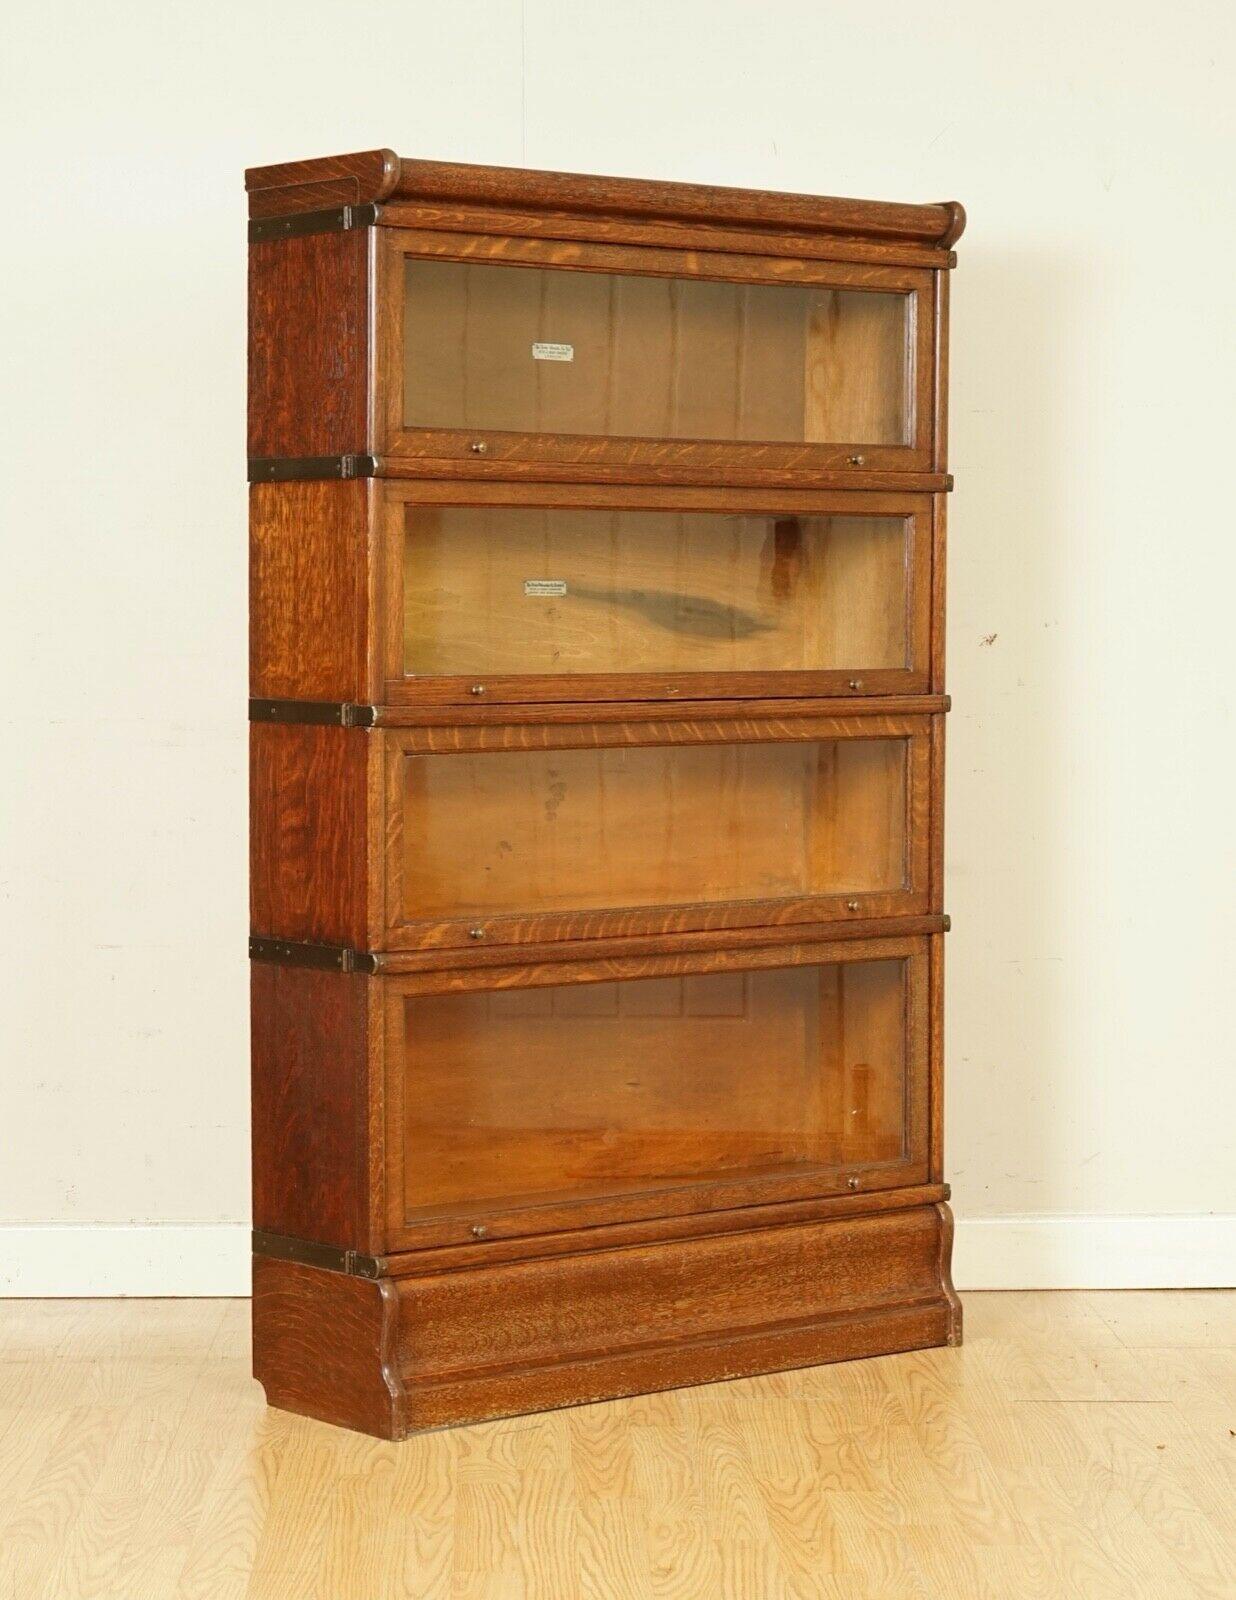 We are delighted to offer for sale this stunning globe Wernicke Barristers oak bookcase.
We have another one that's matching but slightly different.
A very well made, good condition highly desirable and collectable piece.

We have lightly